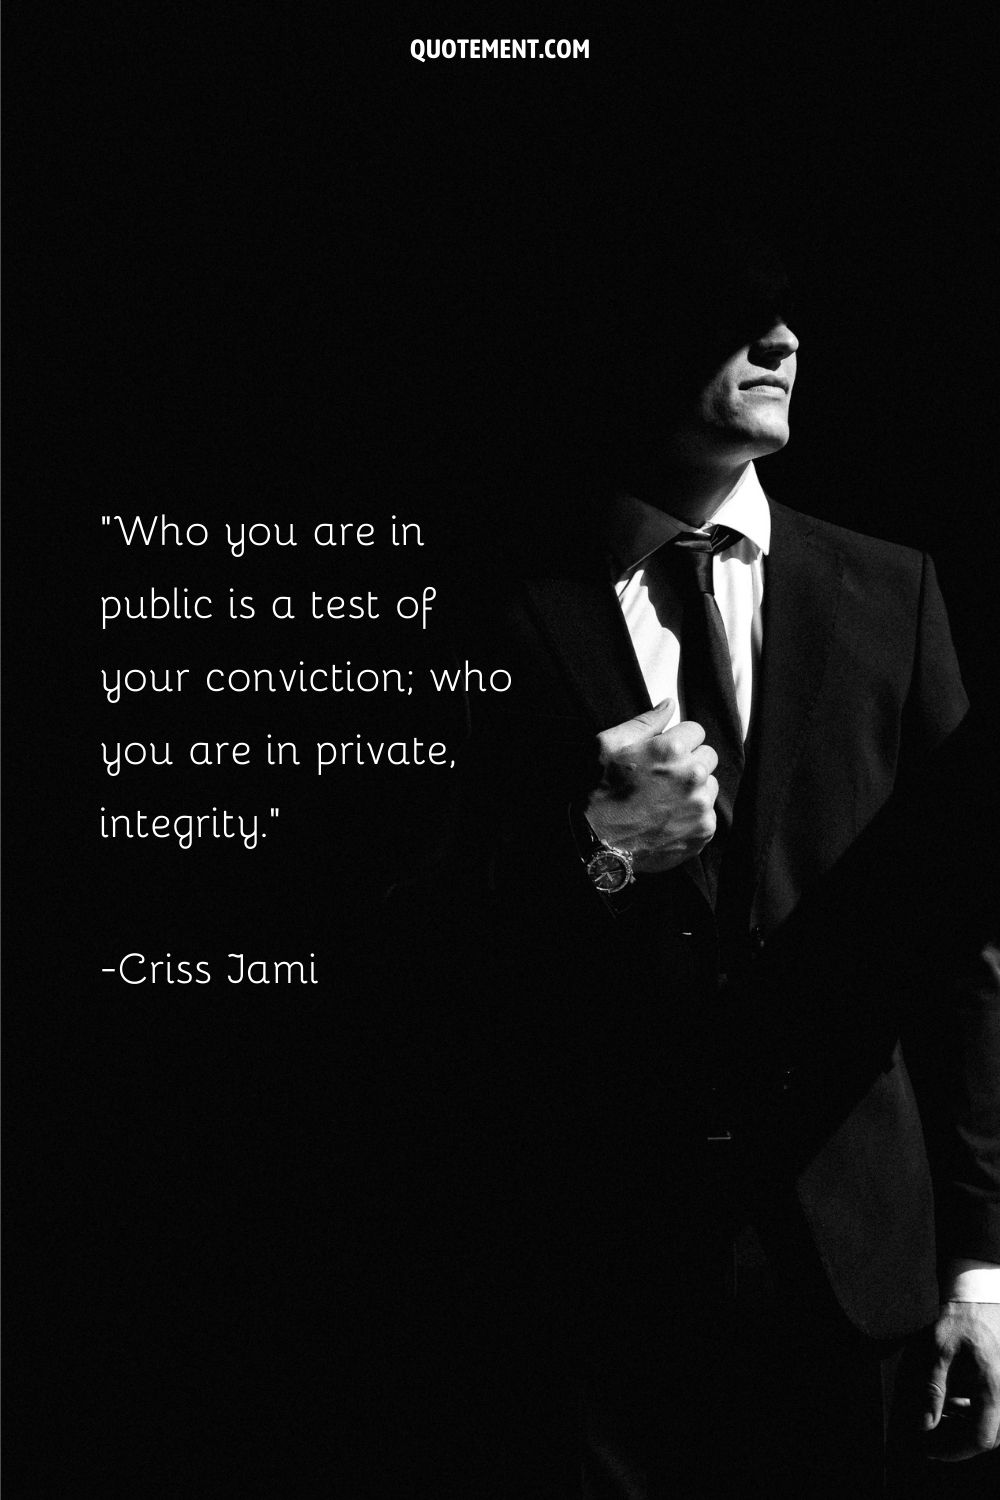 Who you are in public is a test of your conviction; who you are in private, integrity